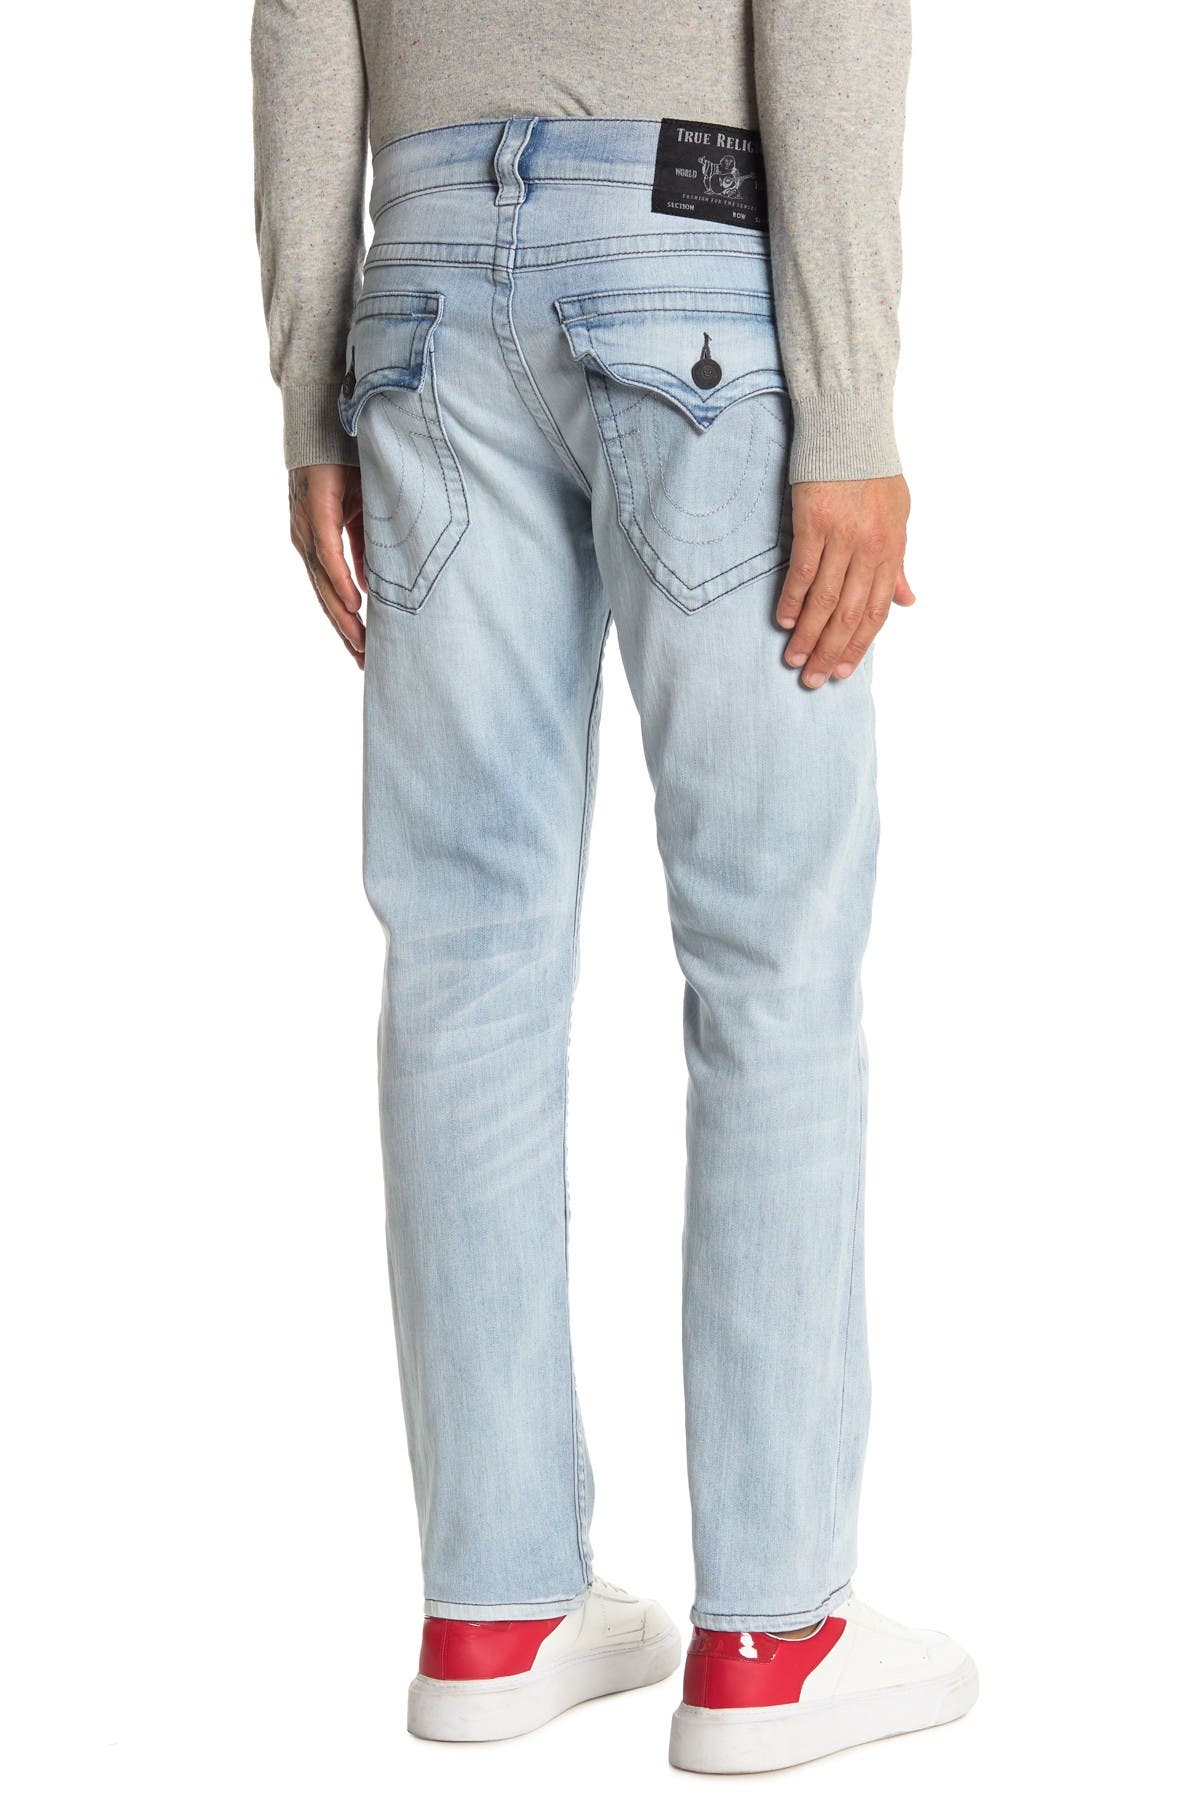 true religion relaxed slim jeans